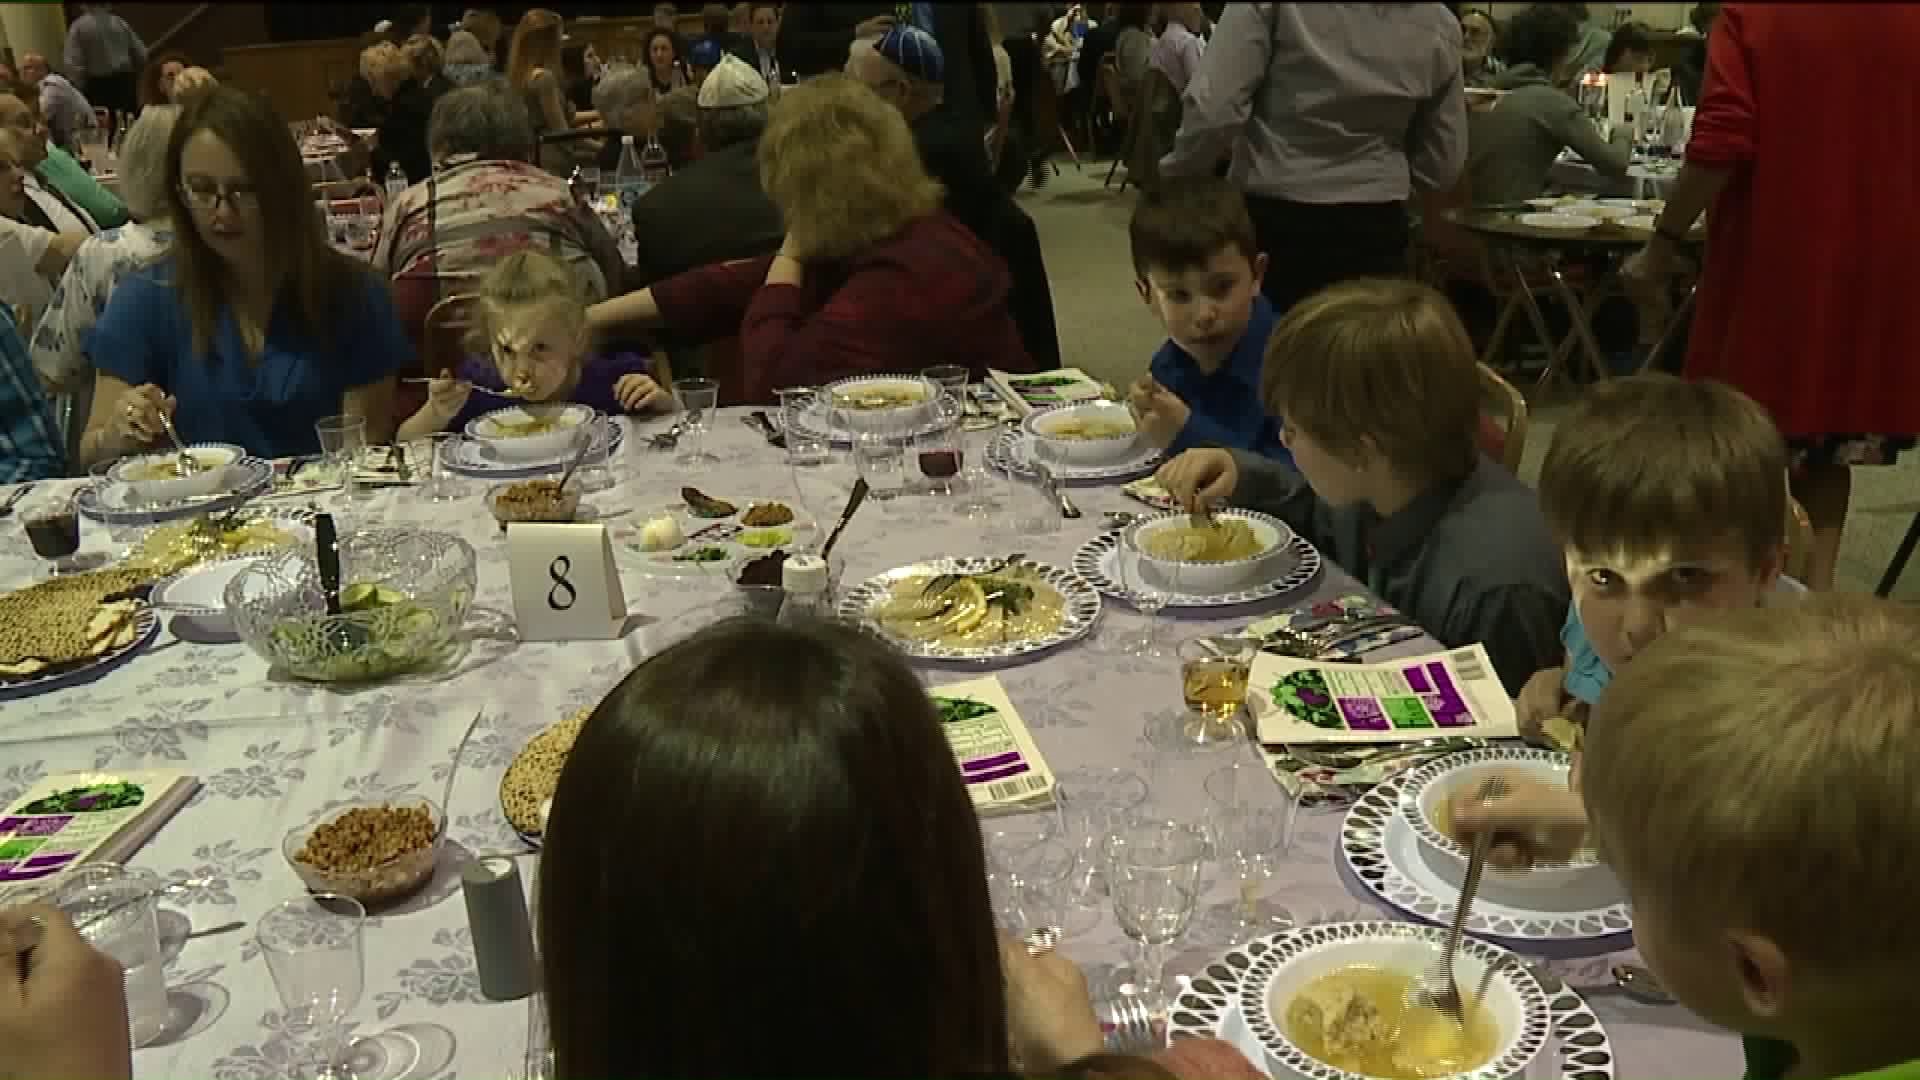 Seder Dinner in Wilkes-Barre Marks First Night of Passover